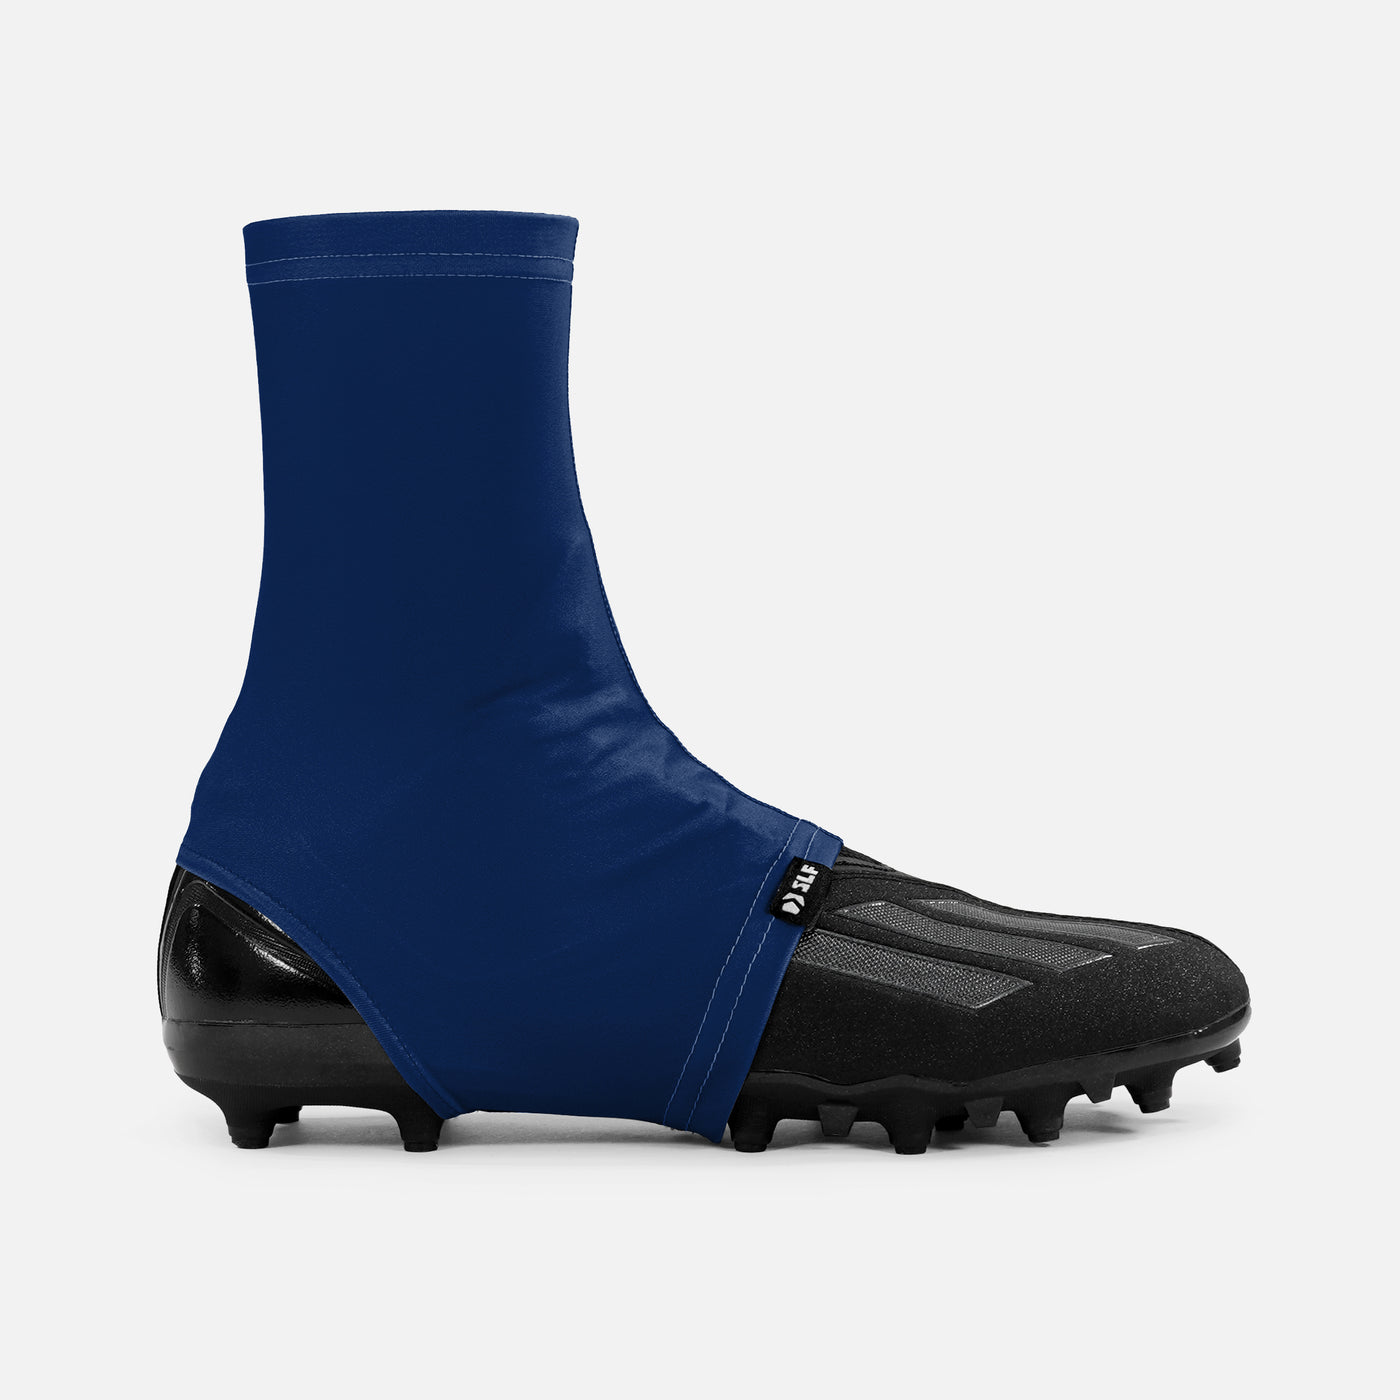 Hue Navy Spats / Cleat Covers - Big